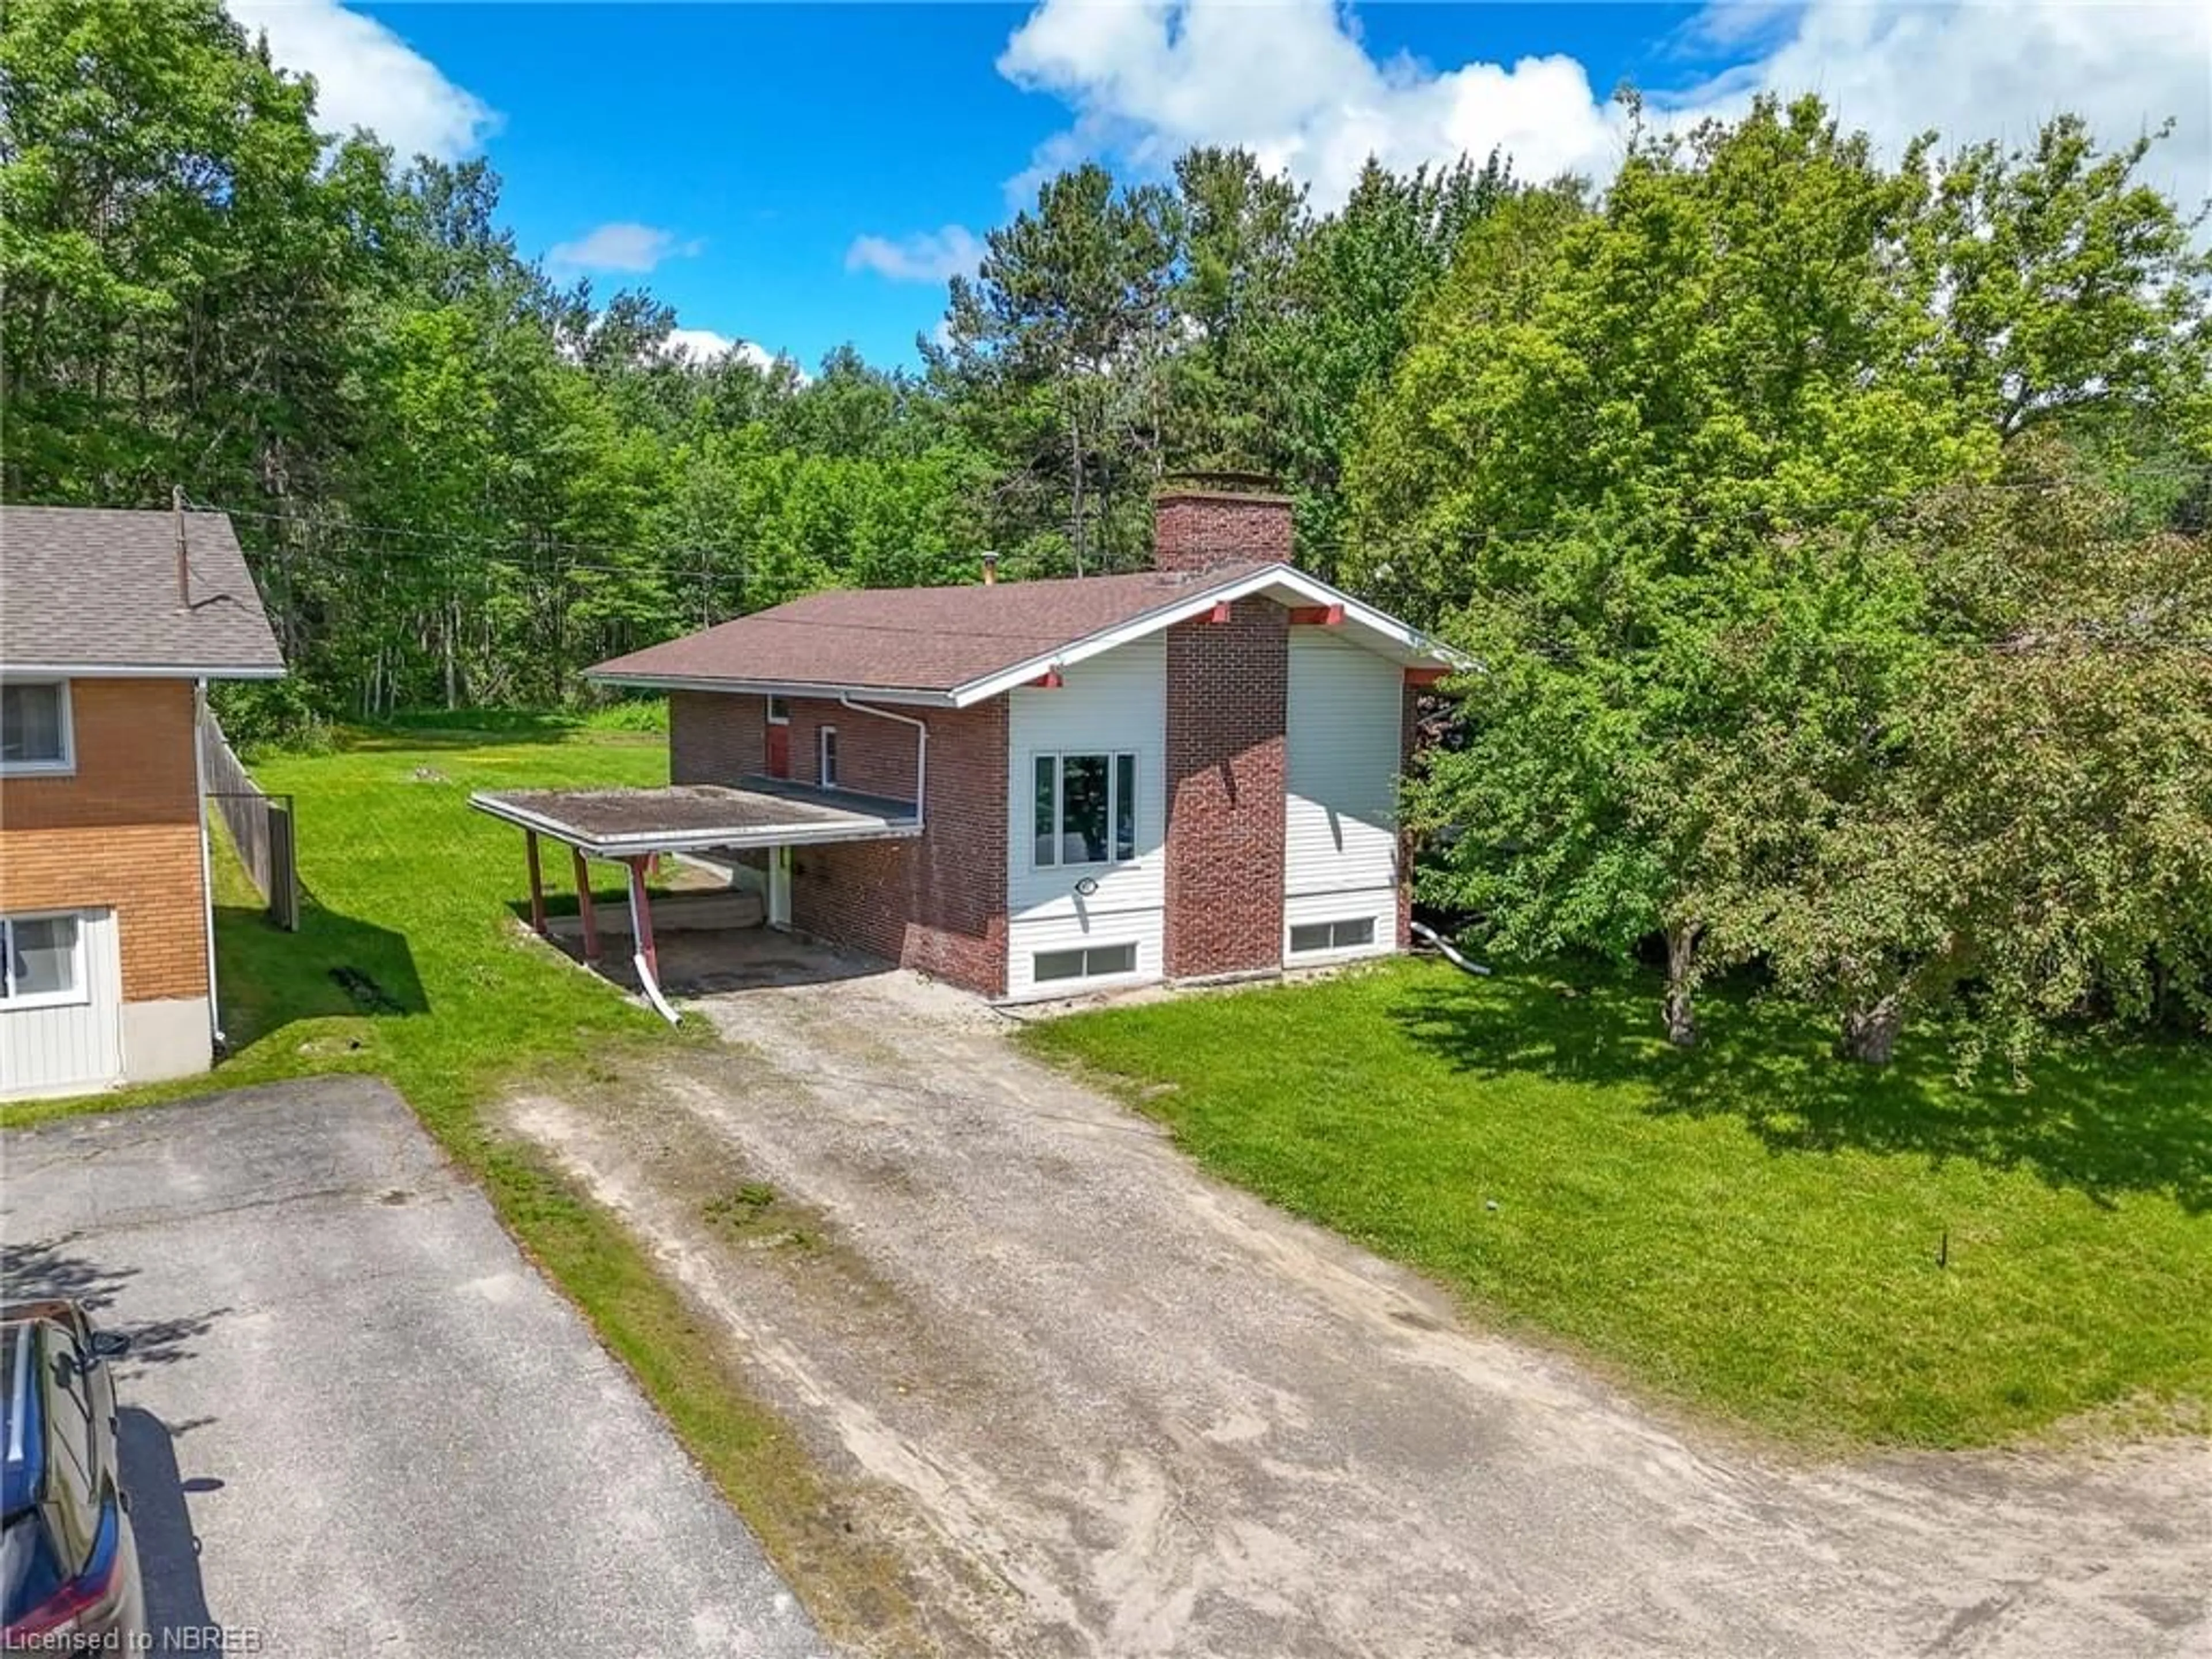 Cottage for 677 Laurentian Ave, North Bay Ontario P1B 7T8